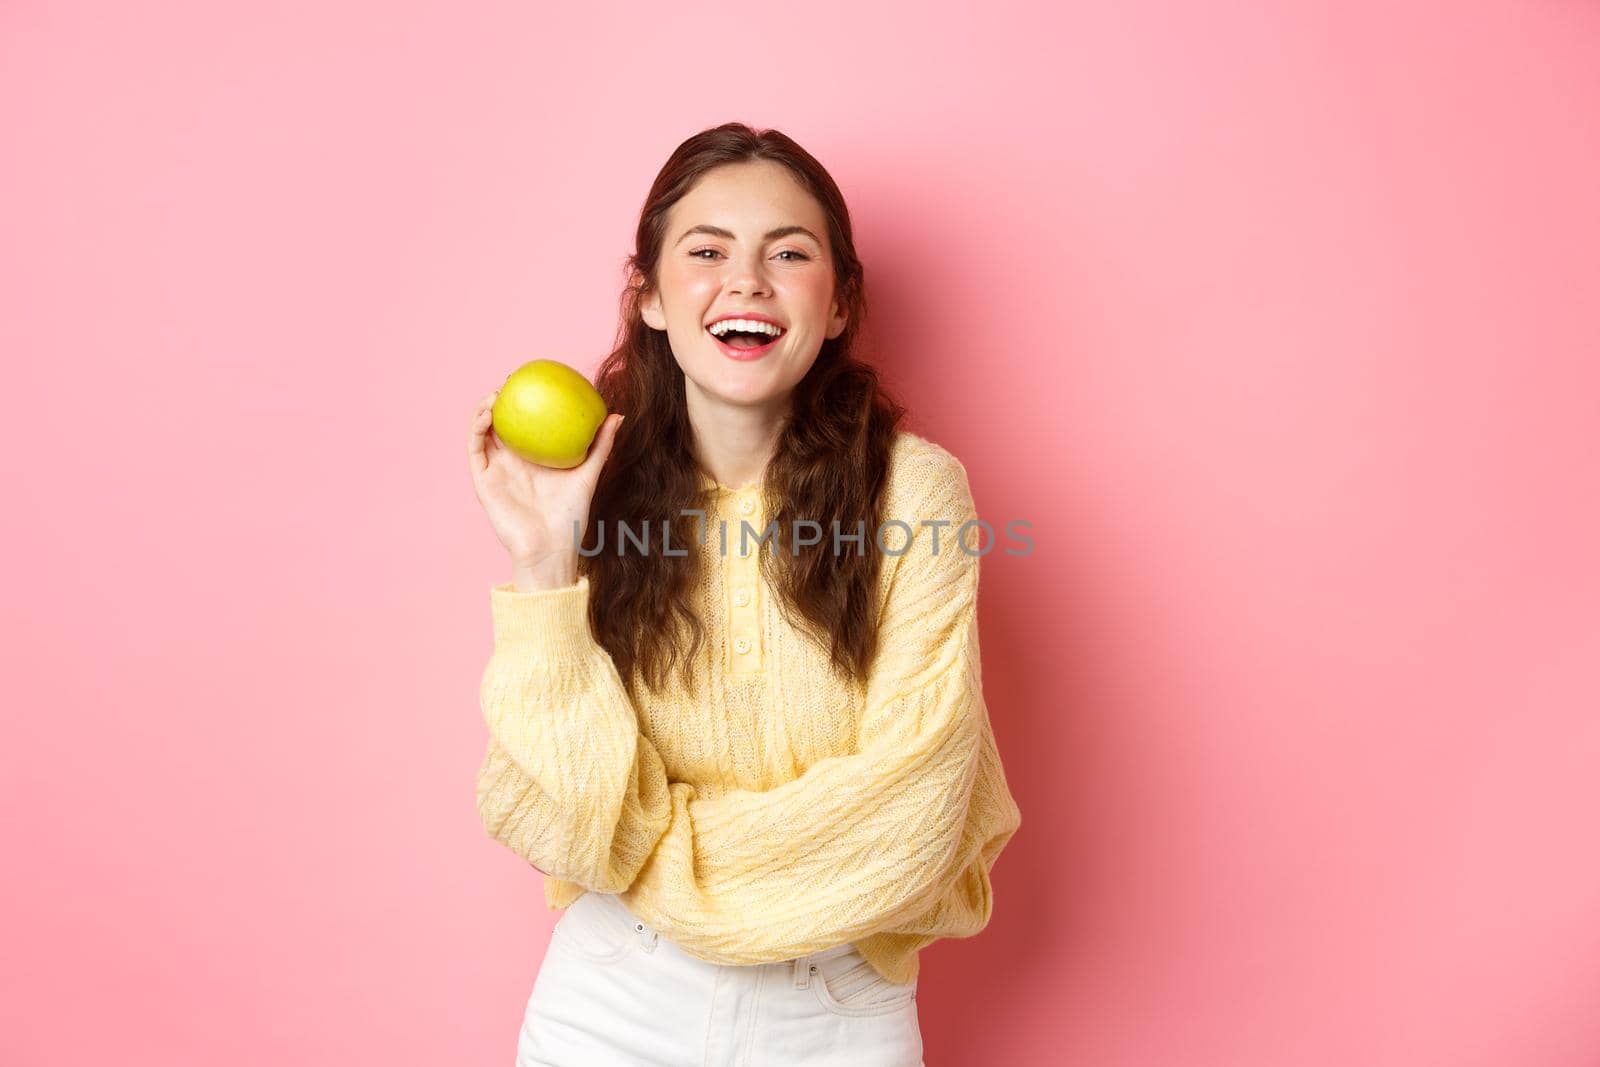 Healthy diet, people and lifestyle concept. An apple day keeps doctor away, girl holding delicious fruit and smiling happy at camera, standing against pink background.